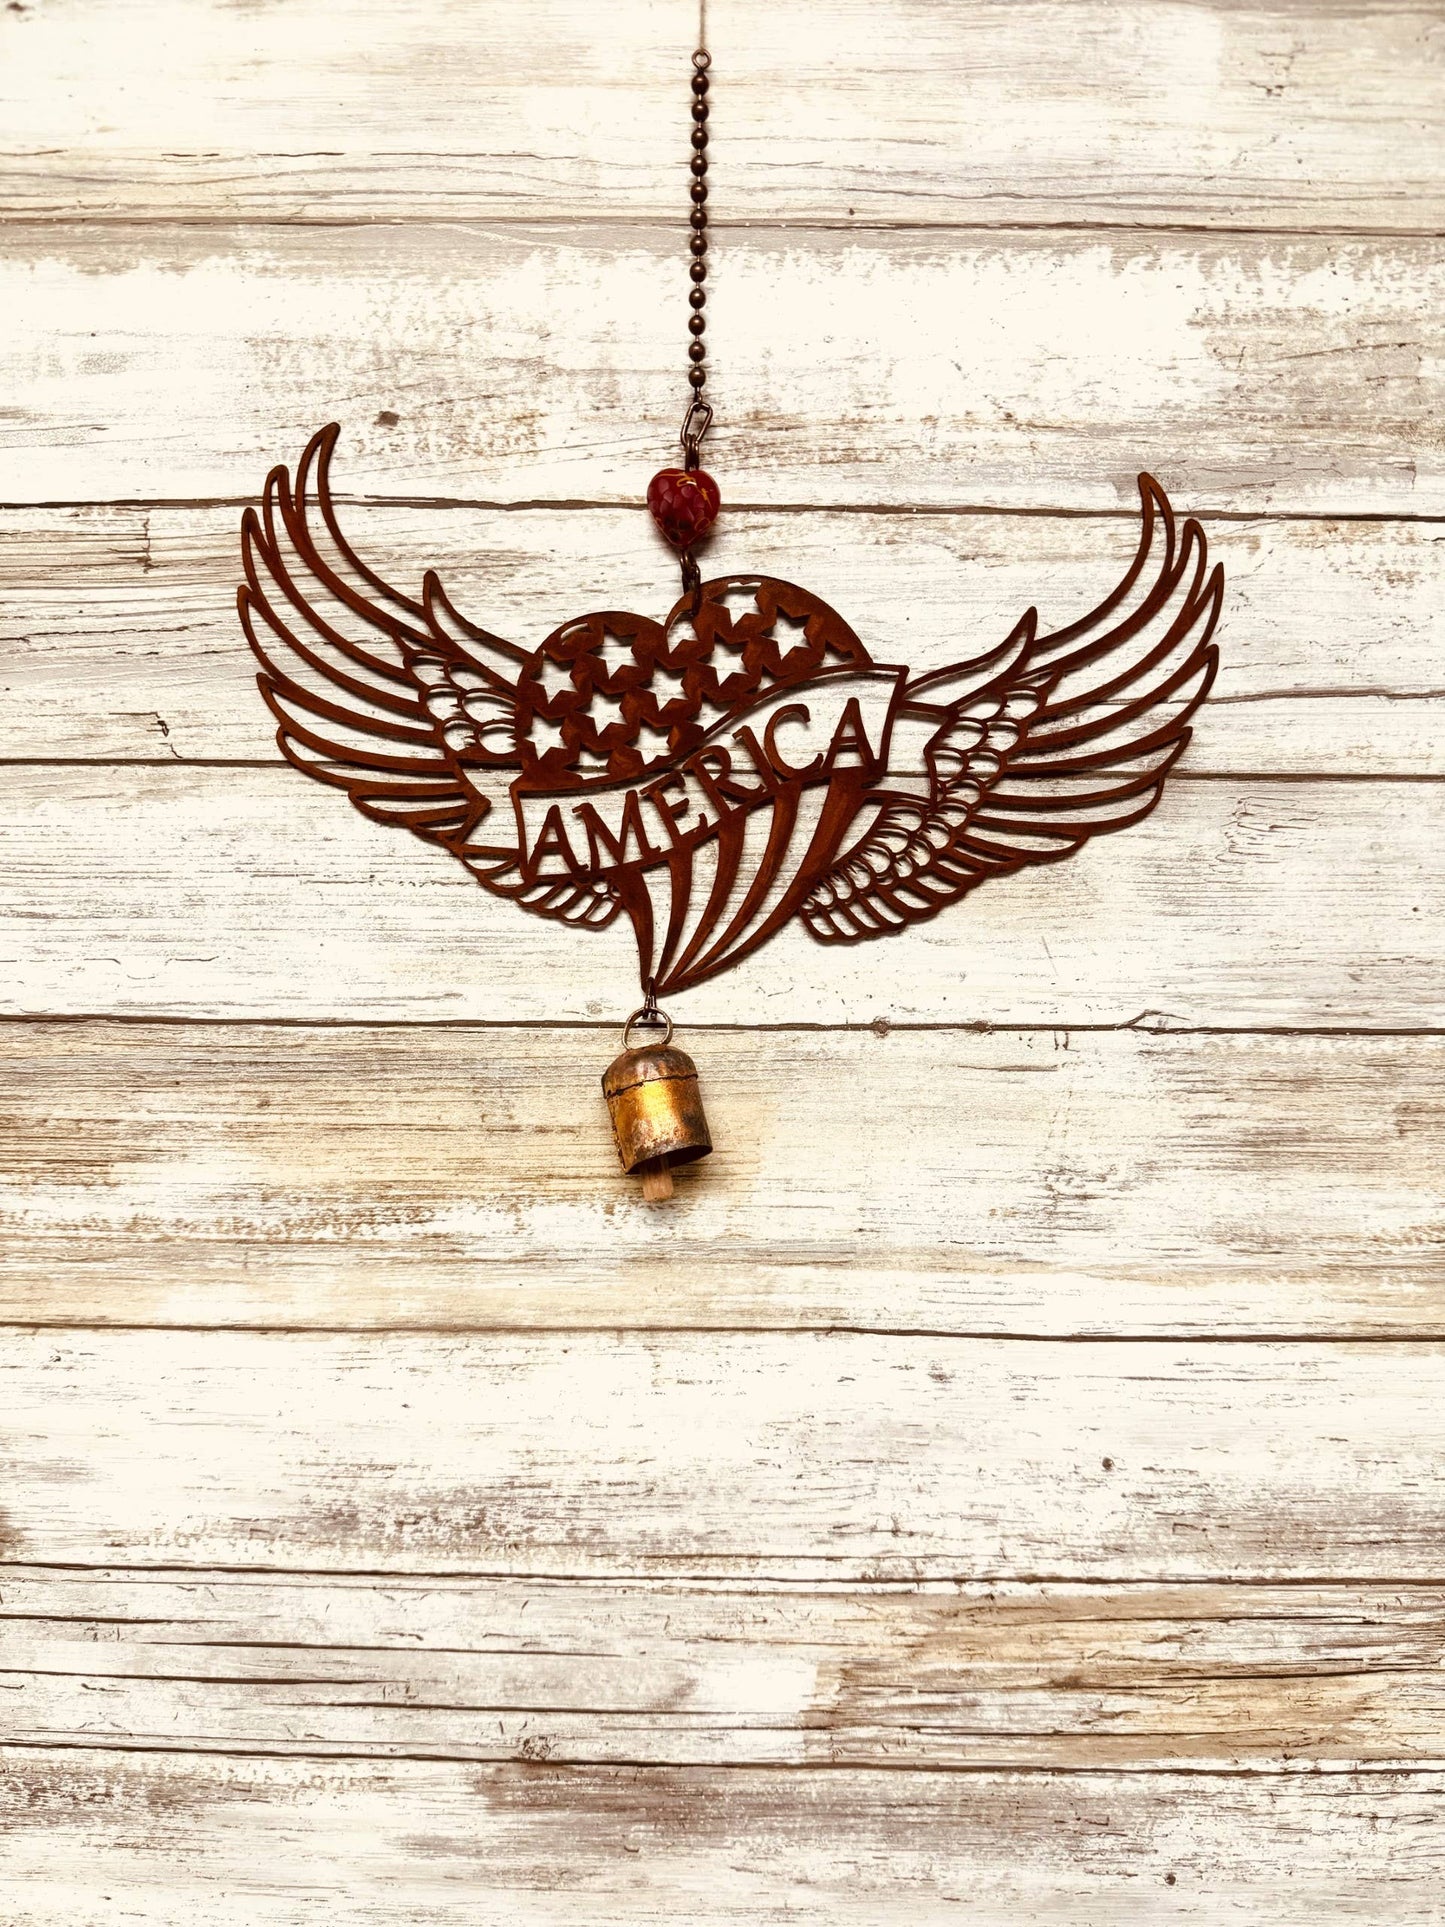 Heart with Wings with America Cutout Metal Garden Bell Chime